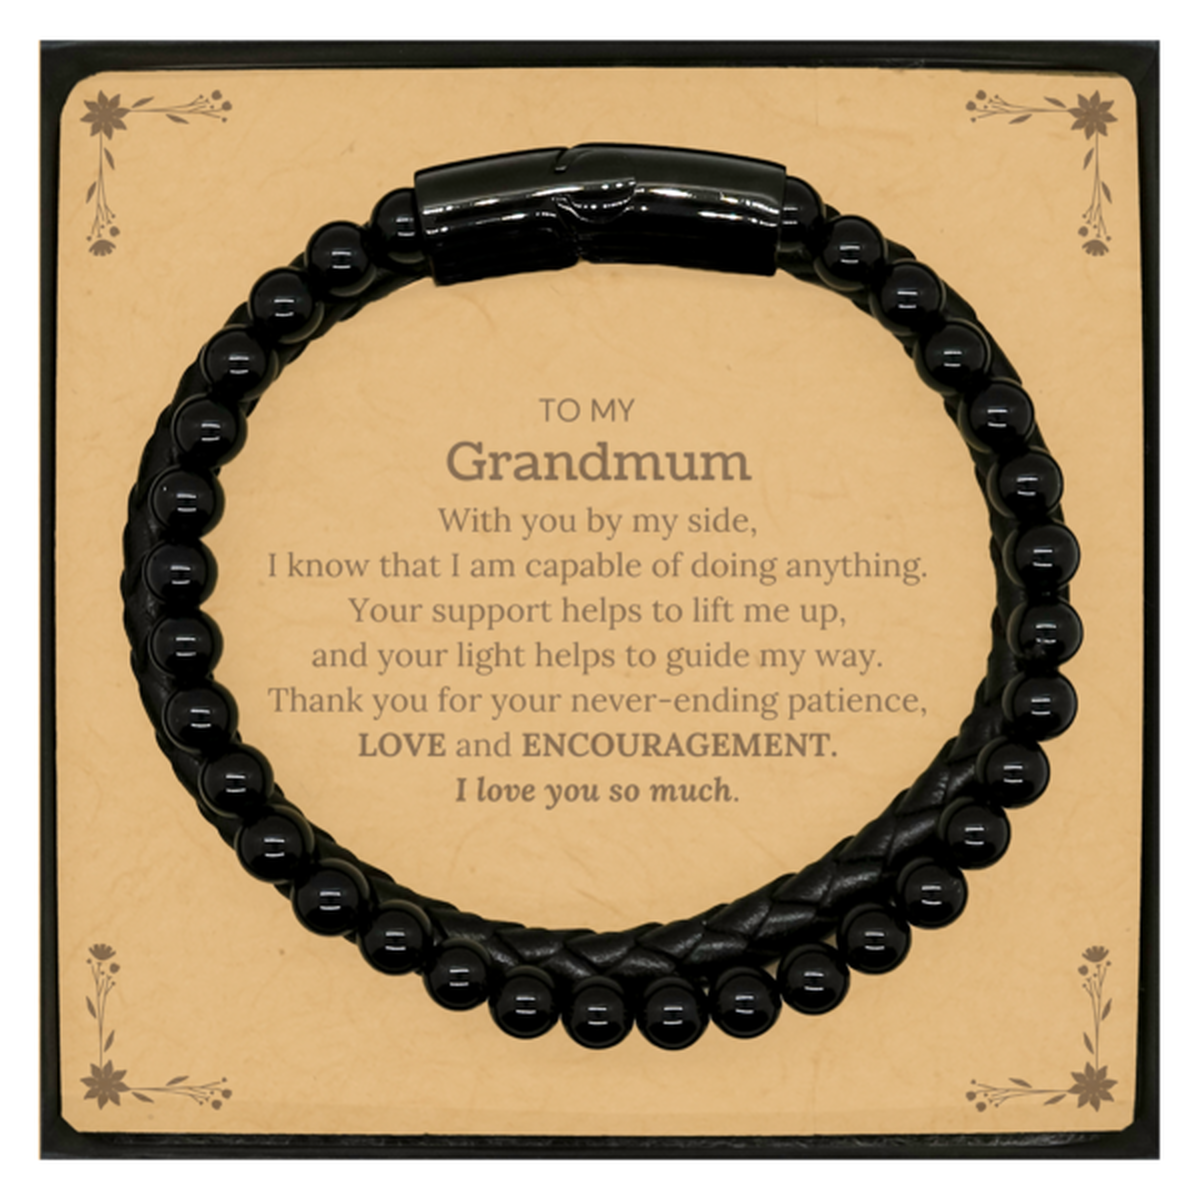 Appreciation Grandmum Stone Leather Bracelets Gifts, To My Grandmum Birthday Christmas Wedding Keepsake Gifts for Grandmum With you by my side, I know that I am capable of doing anything. I love you so much